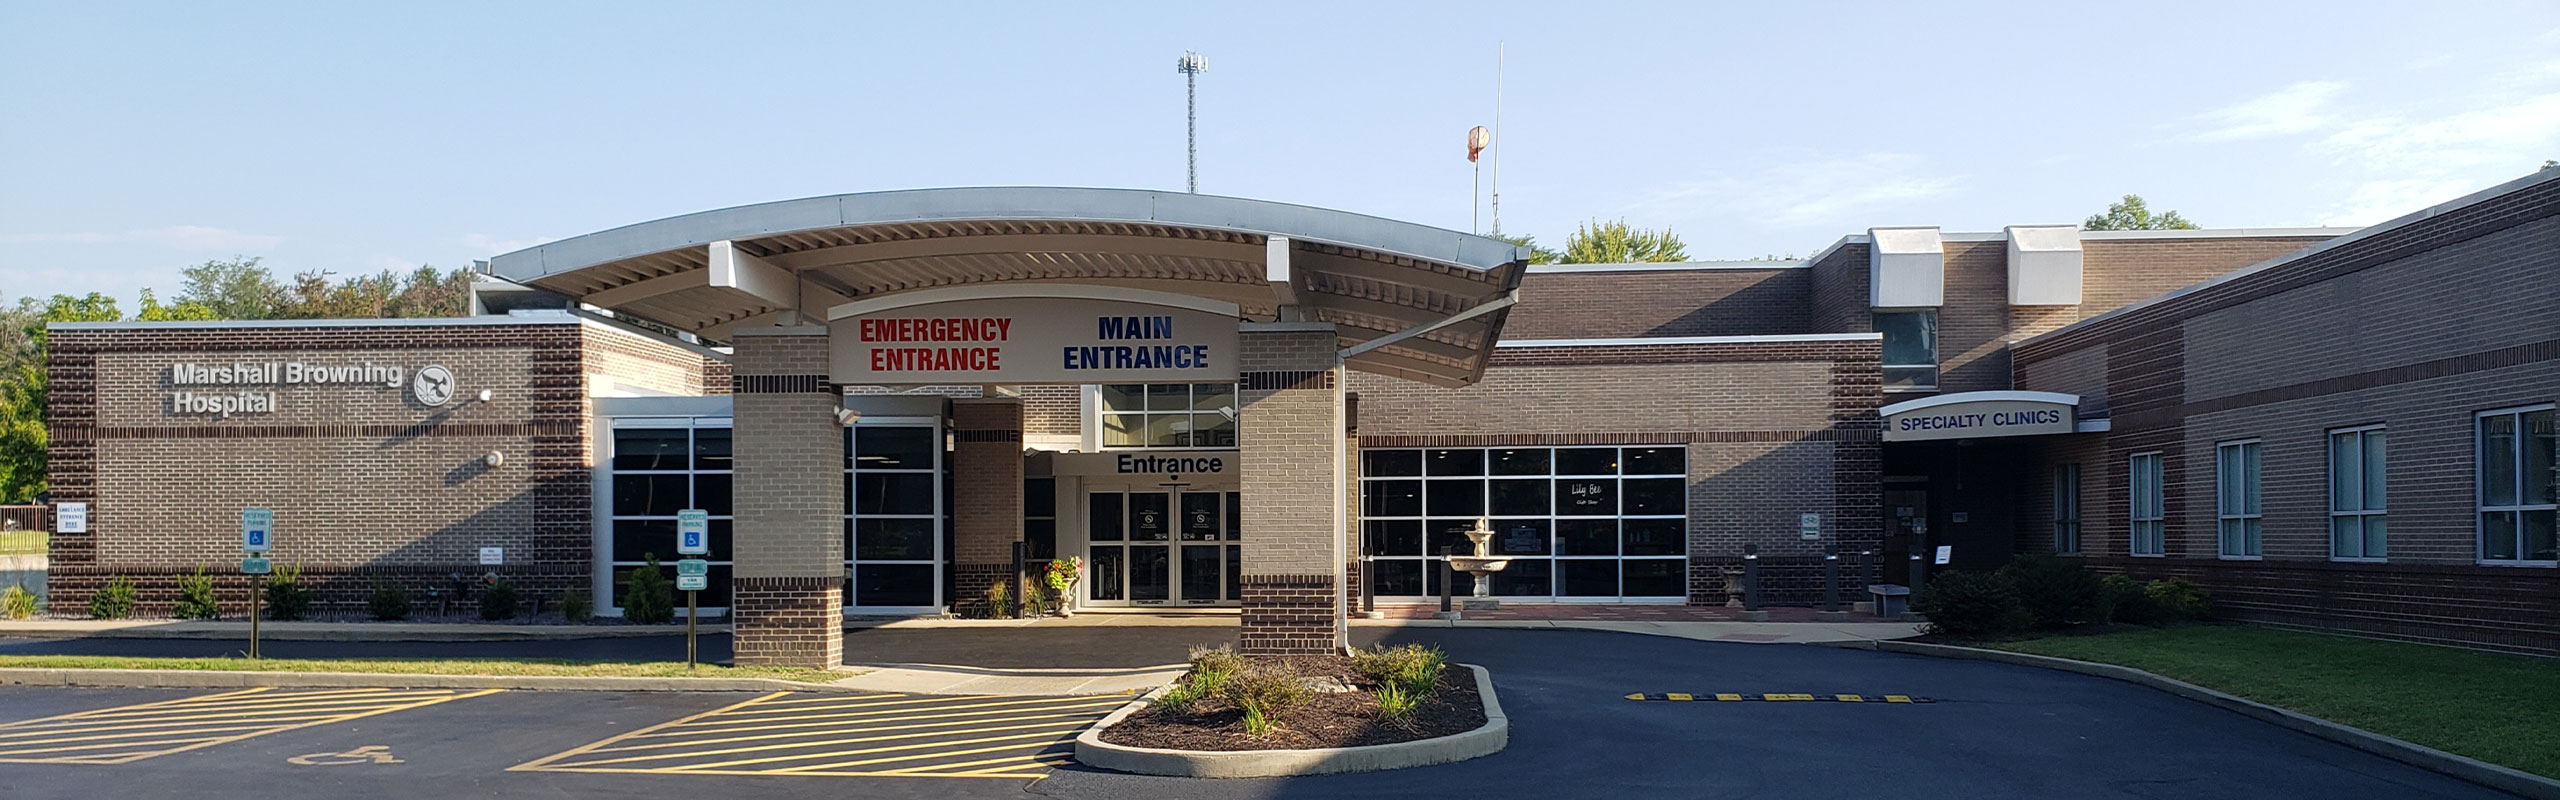 Banner picture of Marshall Browning Hospital EMERGENCY/MAIN ENTRANCE and SPECIALITY CLINICS.